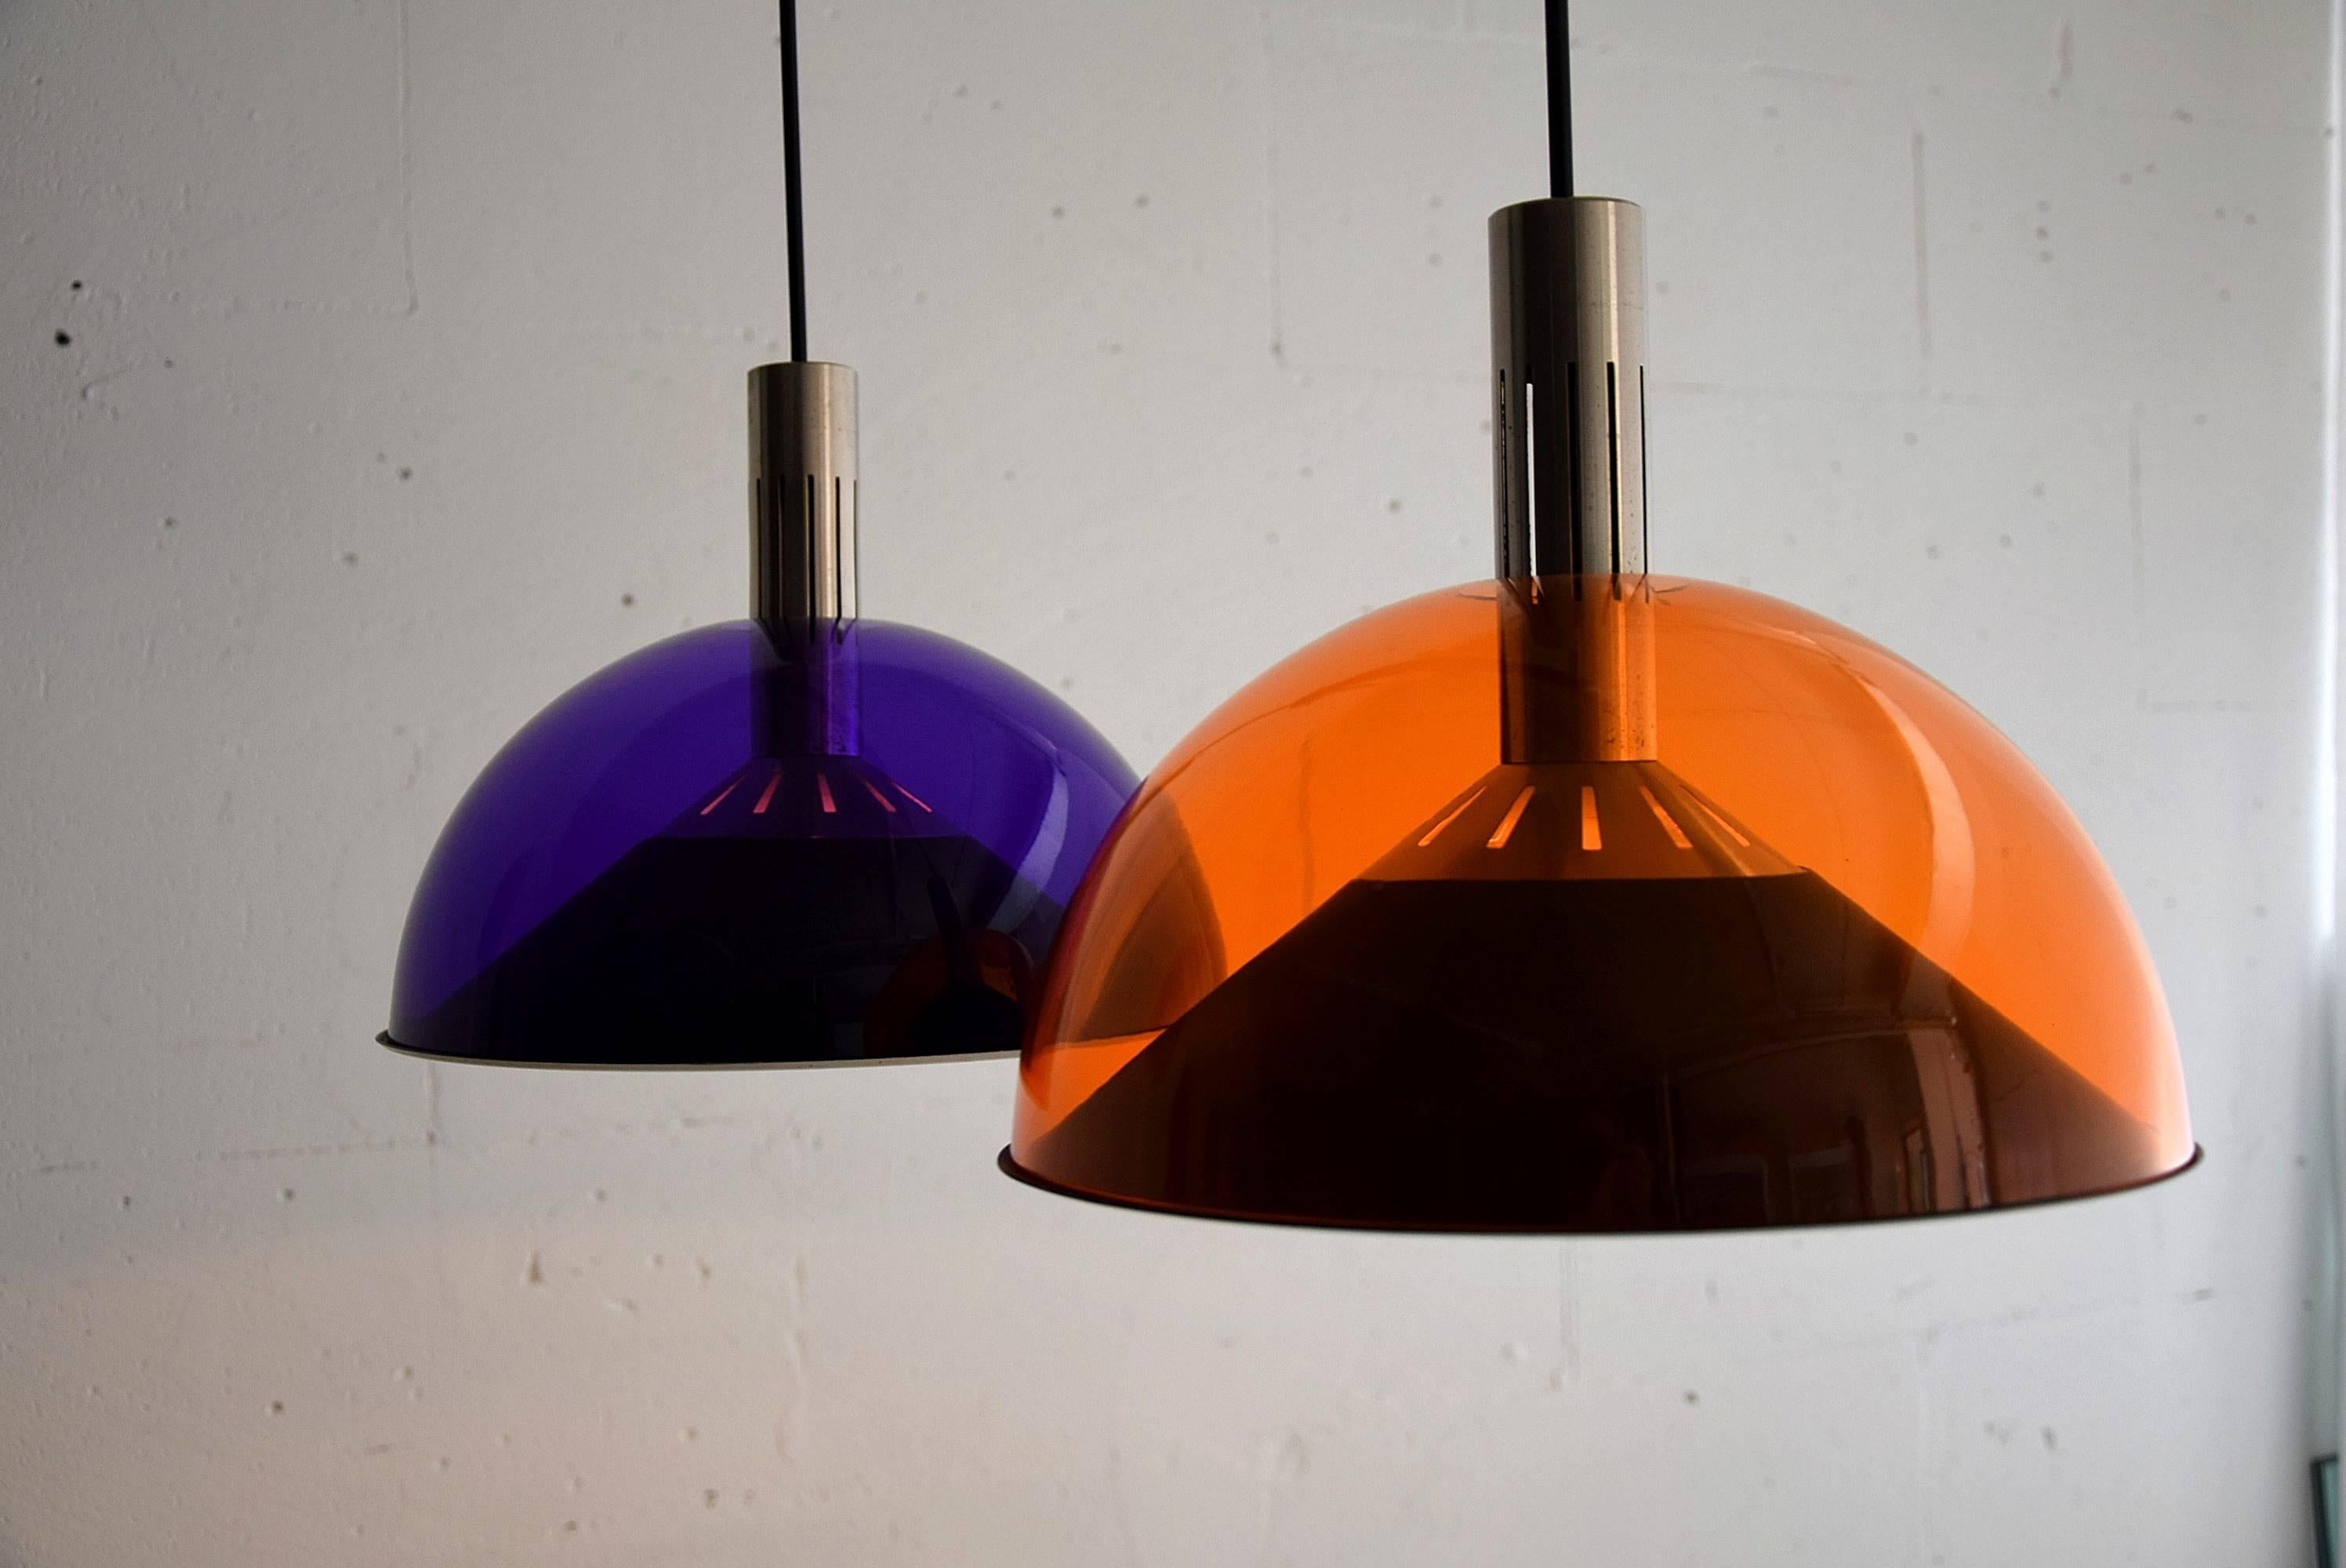 Mid century modern Stilnovo ceiling lamp made of an orange and purple acrylic shade icm with teakwood, stainless steel and black painted iron.
The shades can be adjusted separately in height.

Measurements: H 90 x W 66 x D 30 cm.